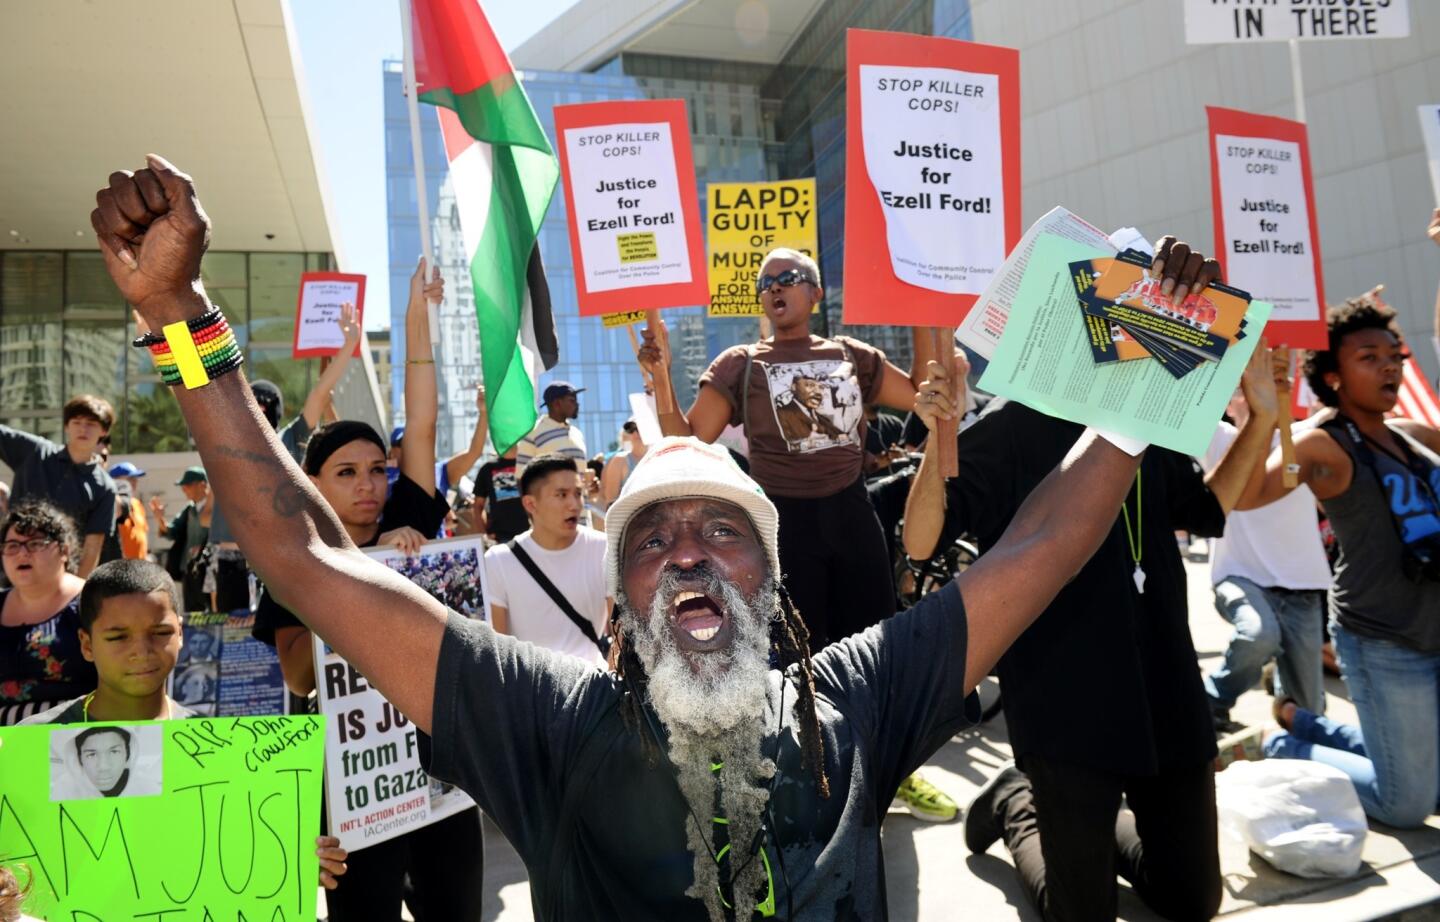 Kelly Kunta leads a rally outside Los Angeles Police Department headquarters in downtown L.A. on Sunday to protest police killings of young black men around the country.